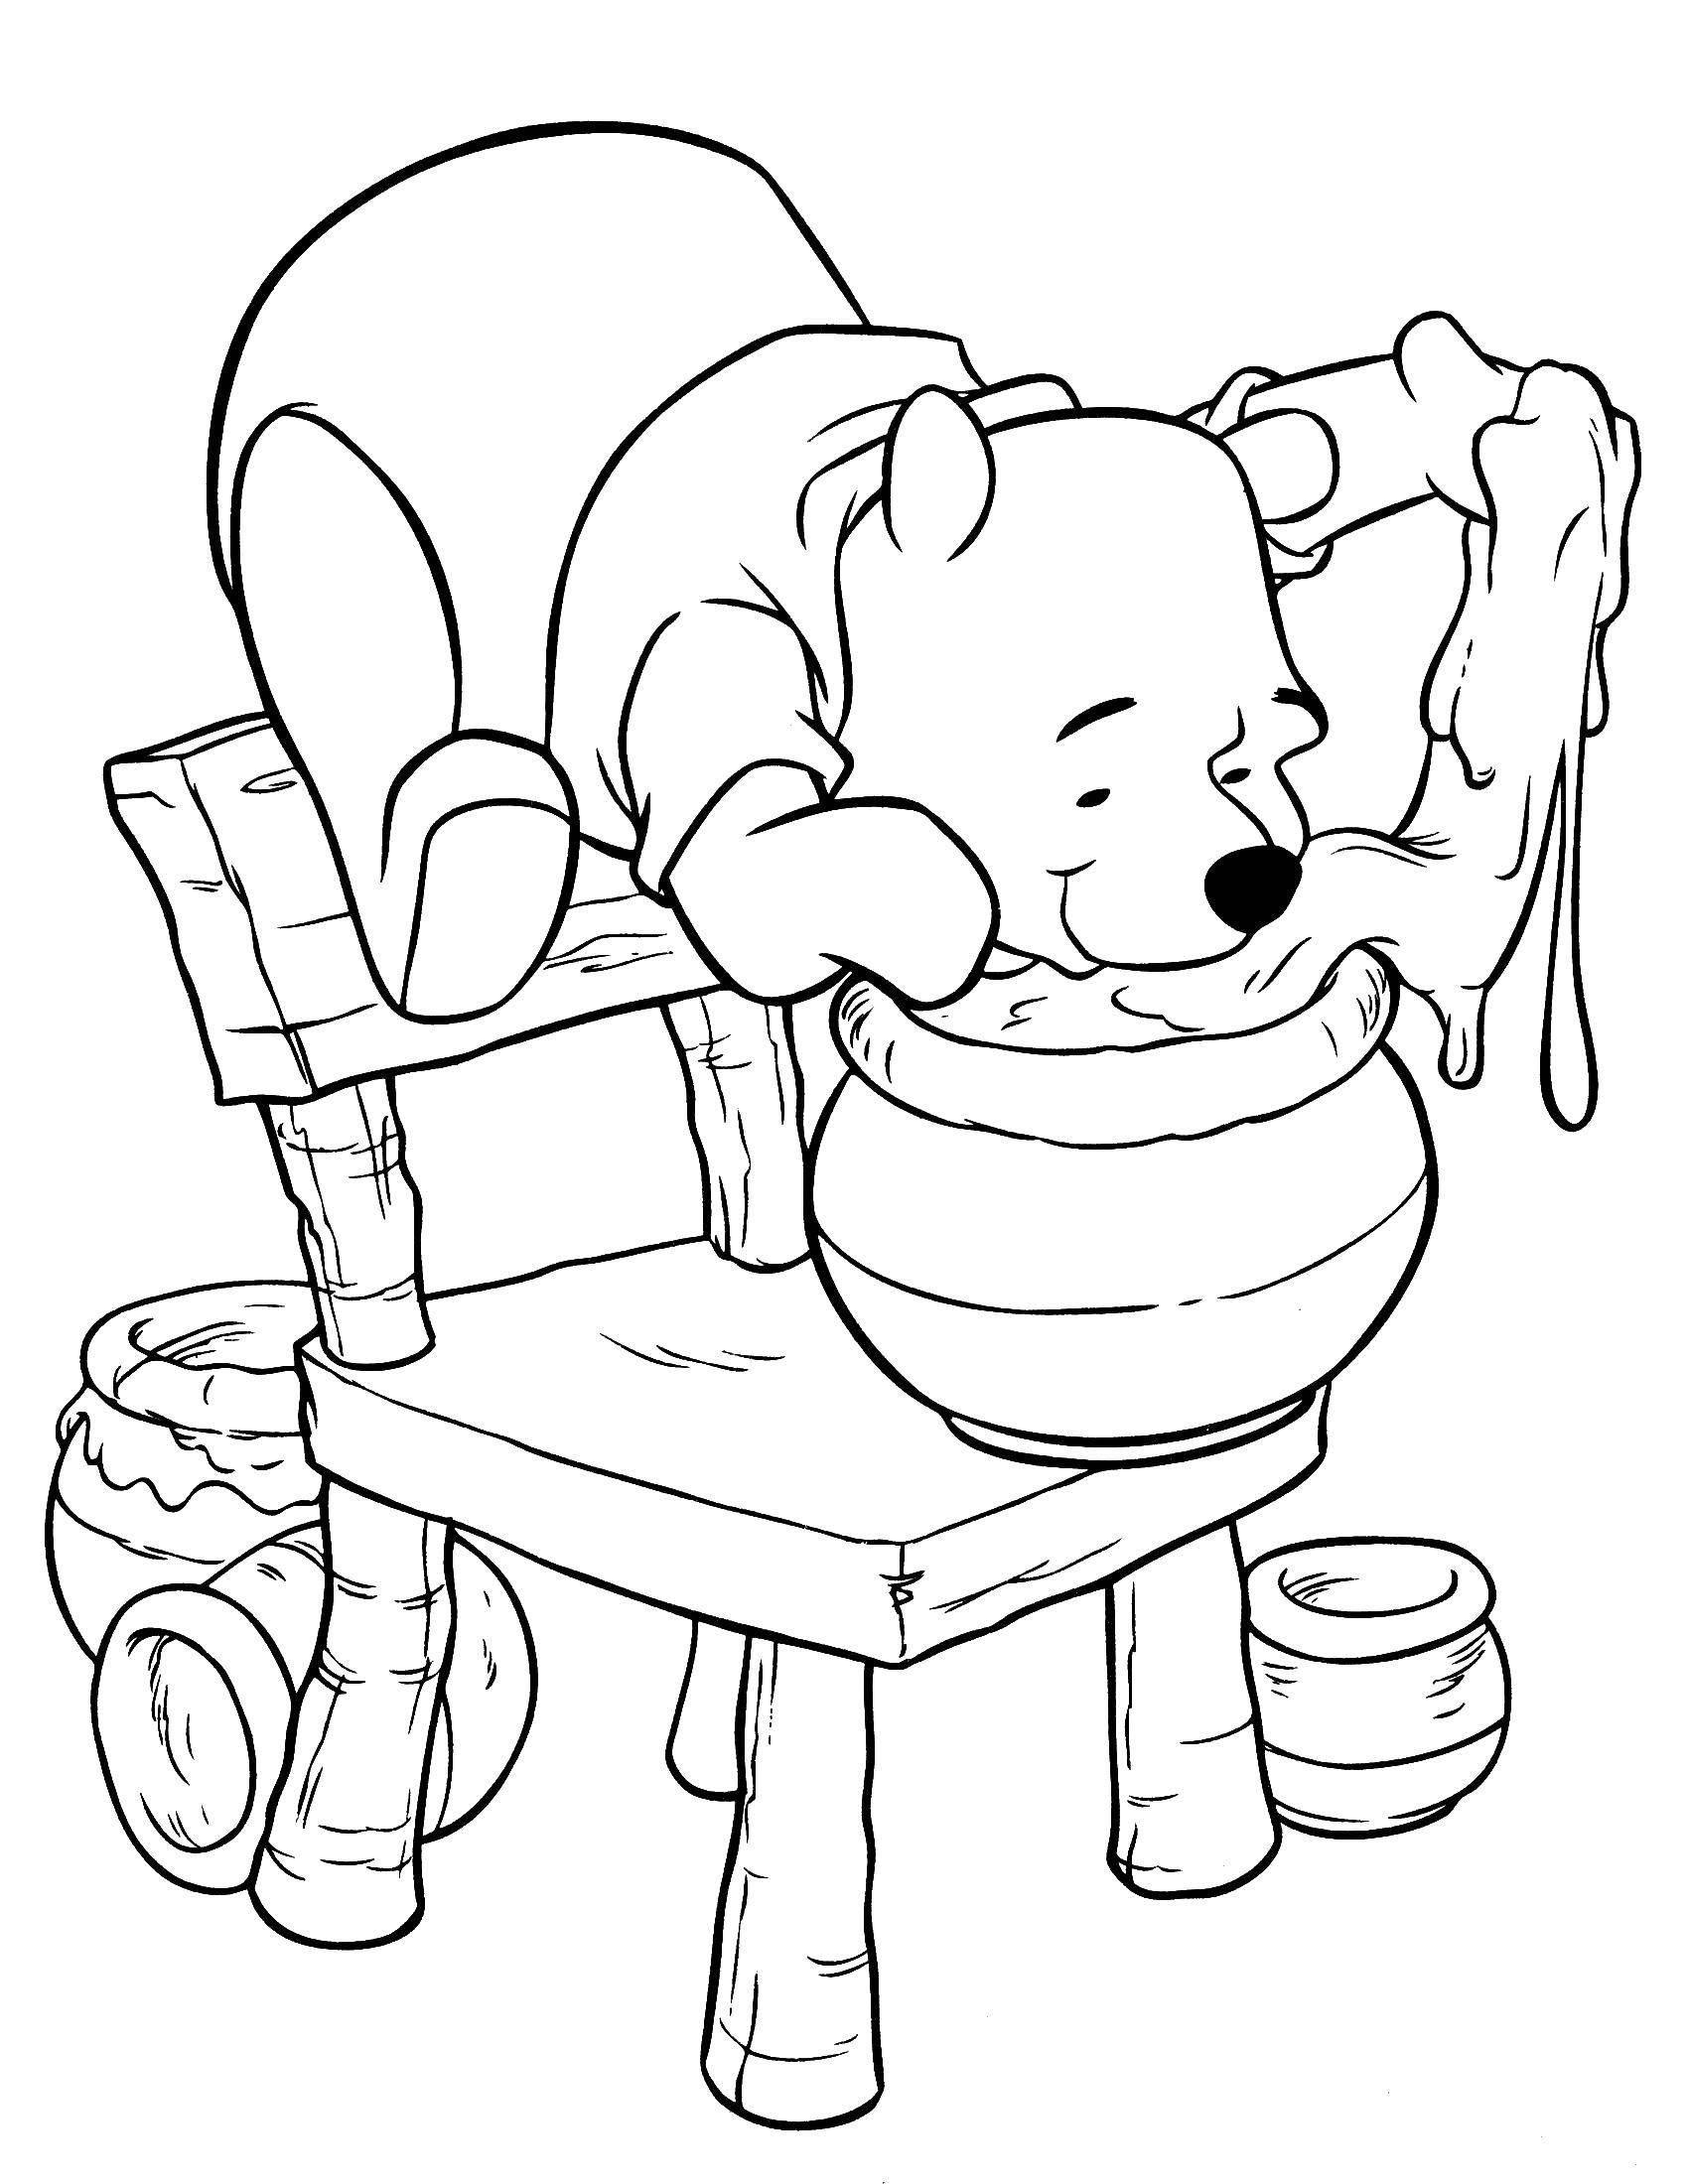 Coloring Winnie the Pooh and the honey. Category Honey. Tags:  Disney honey, Winnie the Pooh.